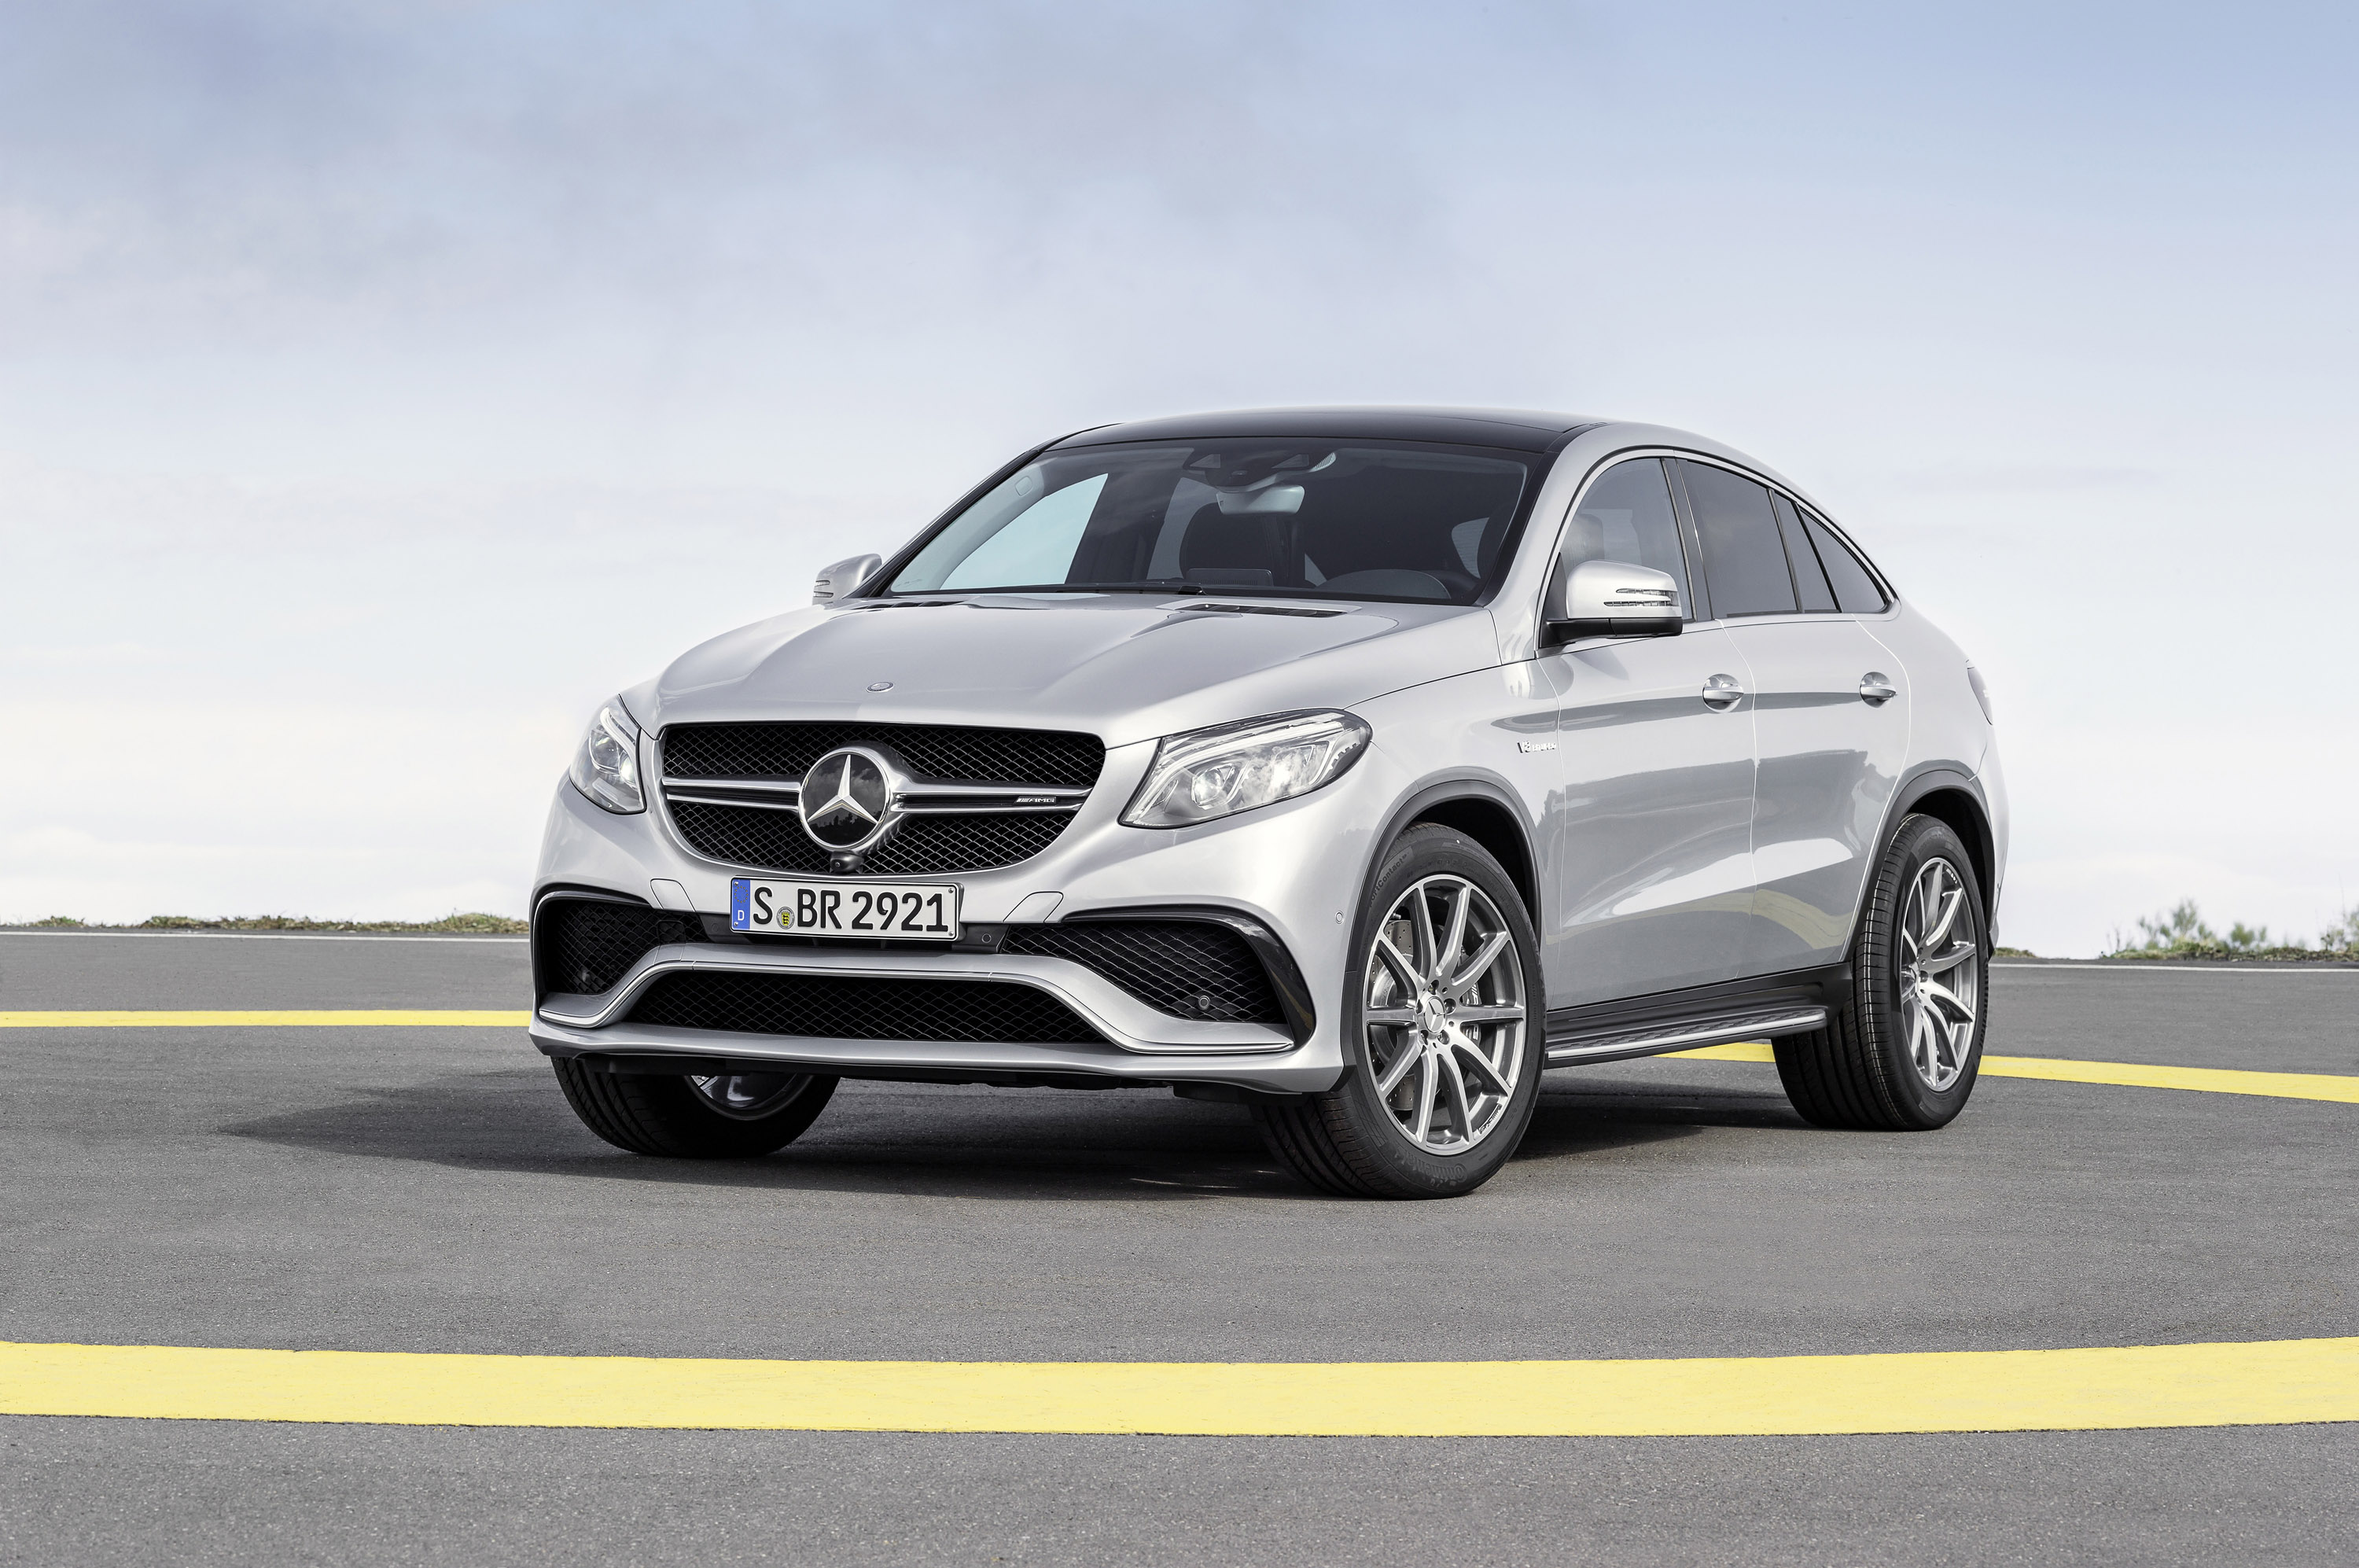 2016 Mercedes-Benz GLE63 AMG Coupe - HD Pictures @ carsinvasion.com